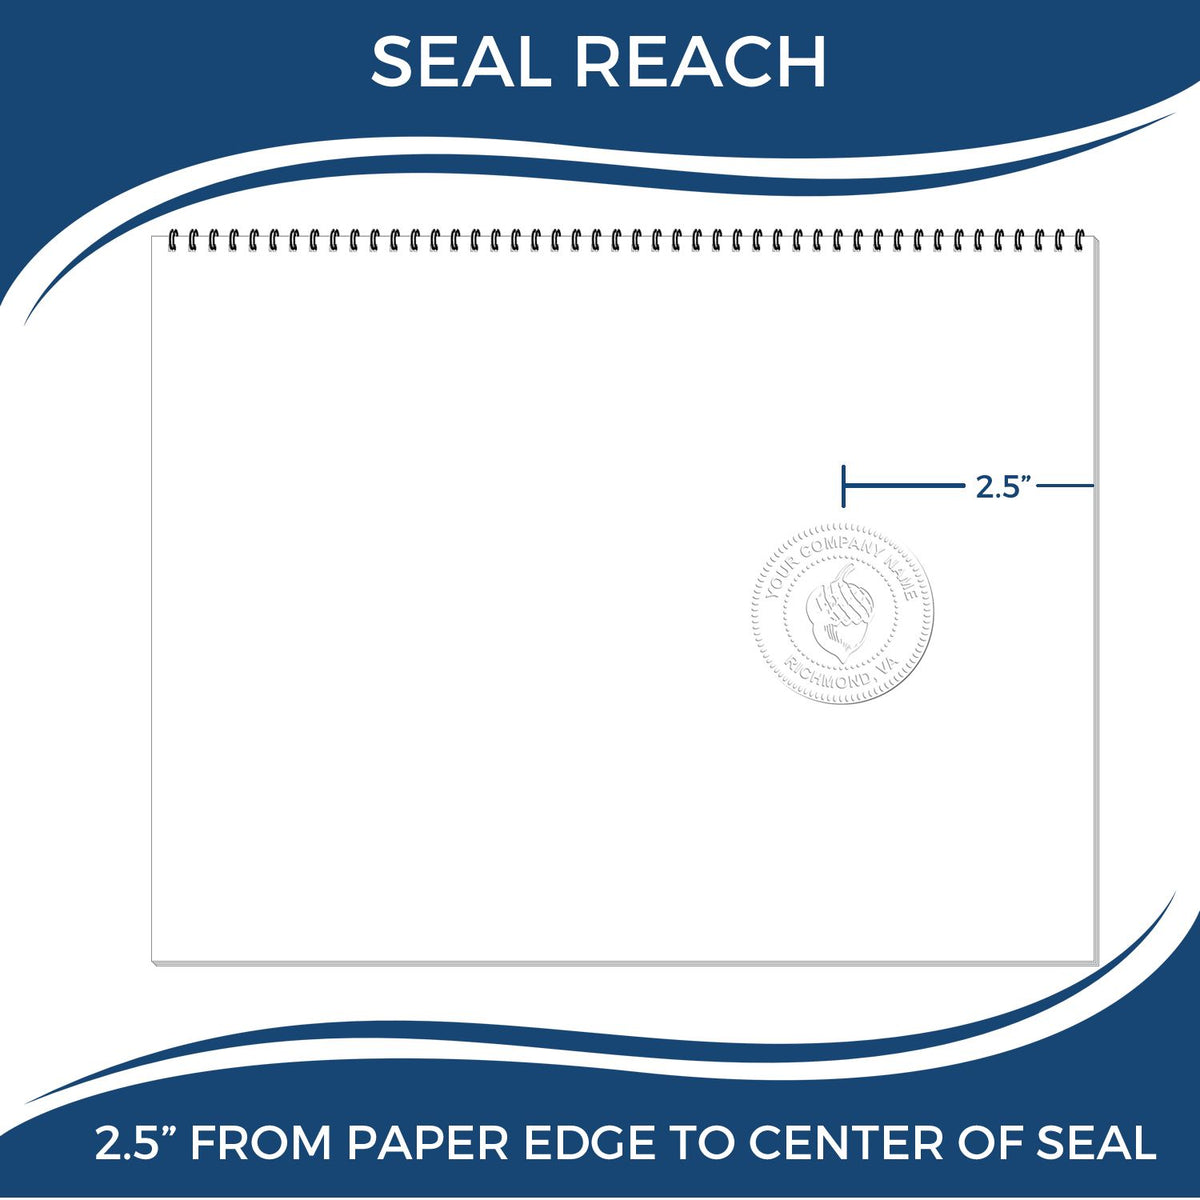 An infographic showing the seal reach which is represented by a ruler and a miniature seal image of the Heavy Duty Cast Iron Michigan Geologist Seal Embosser